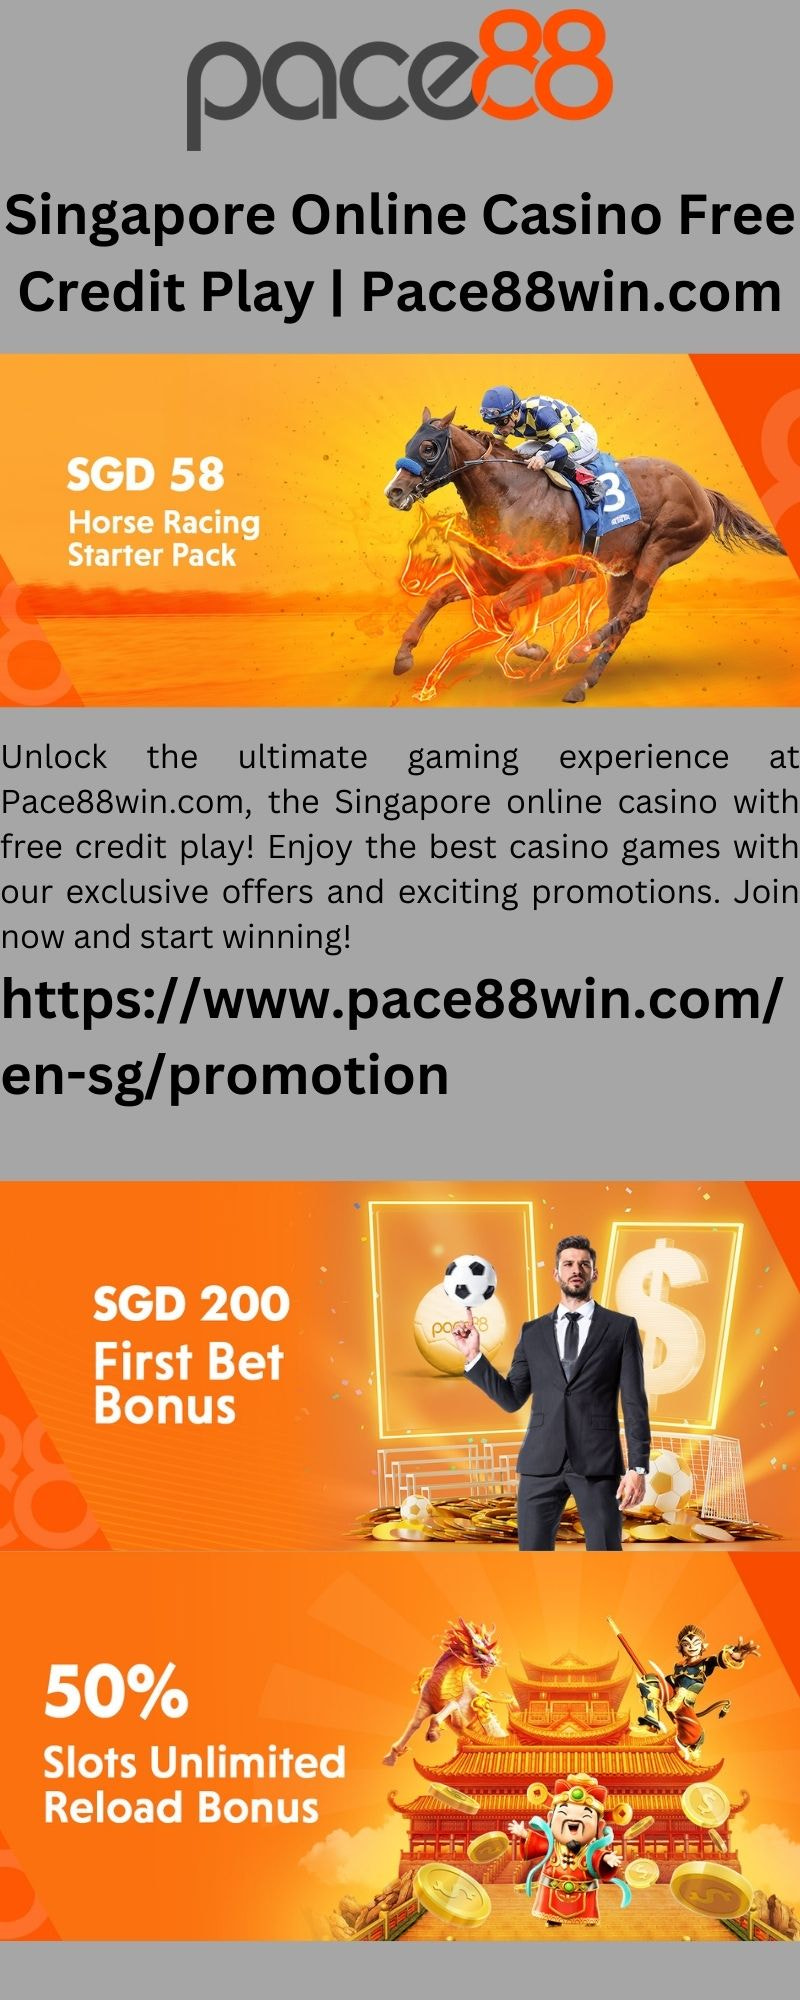 Singapore Online Casino Free Credit Play | Pace88win.com - 1